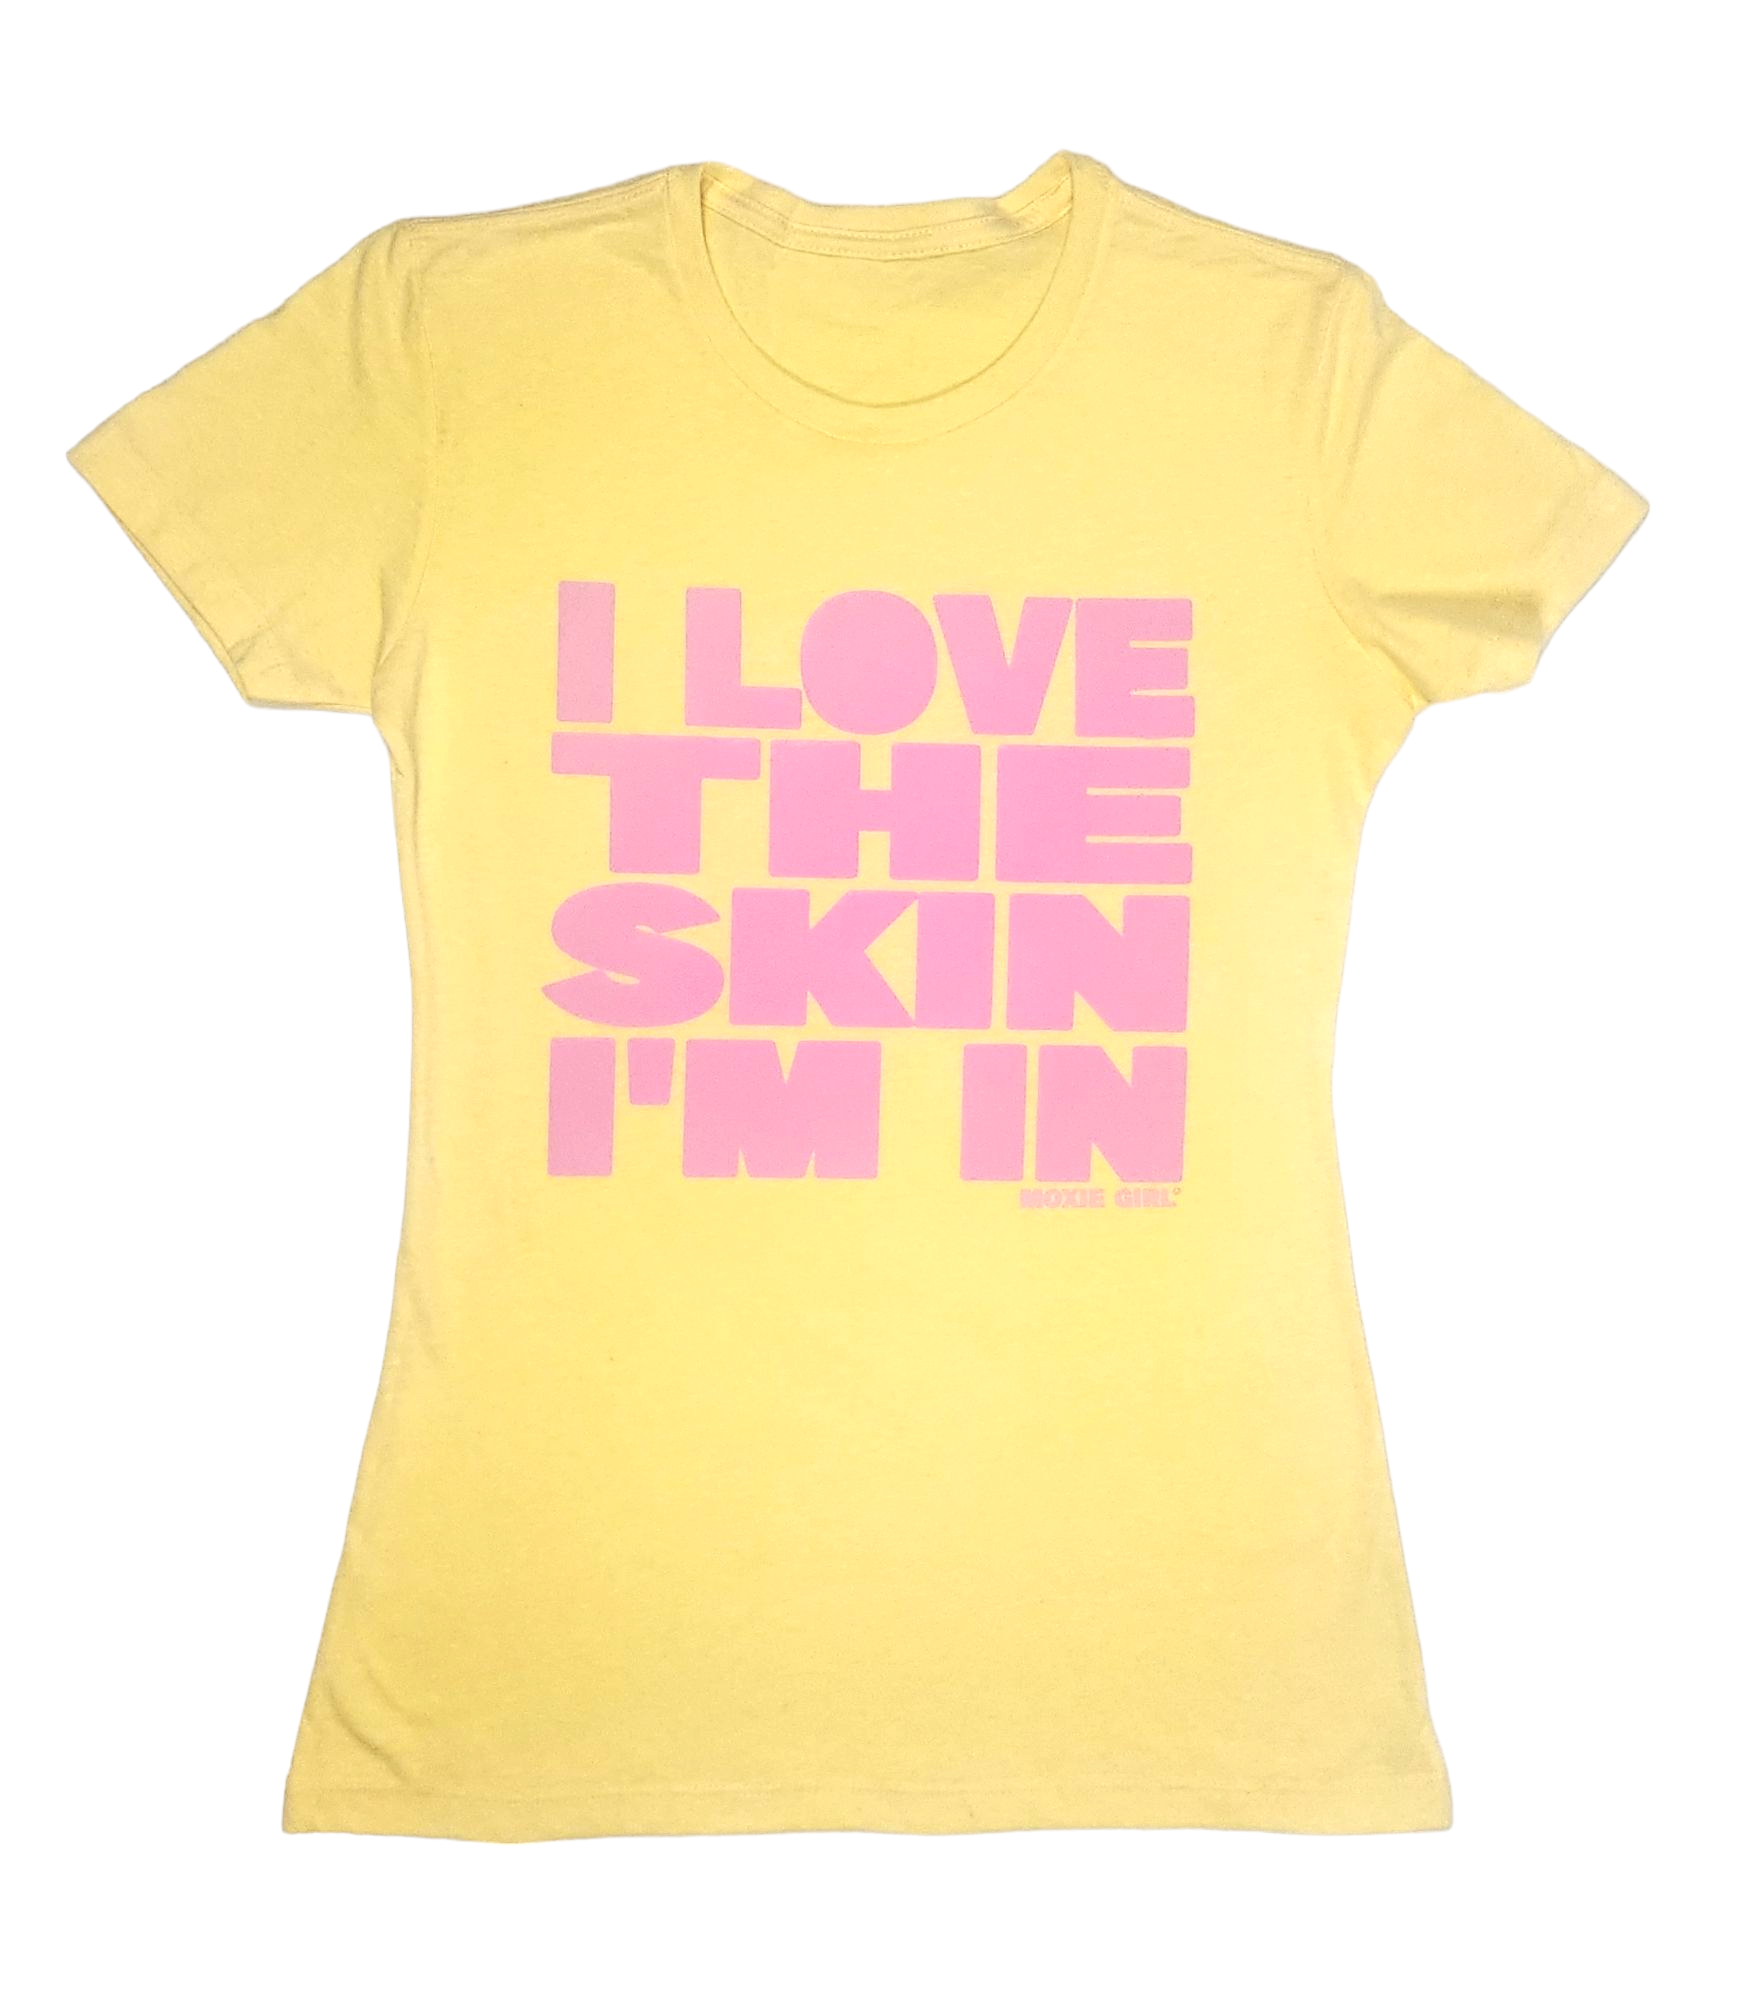 I LOVE THE SKIN I'M IN - Yellow and Pink